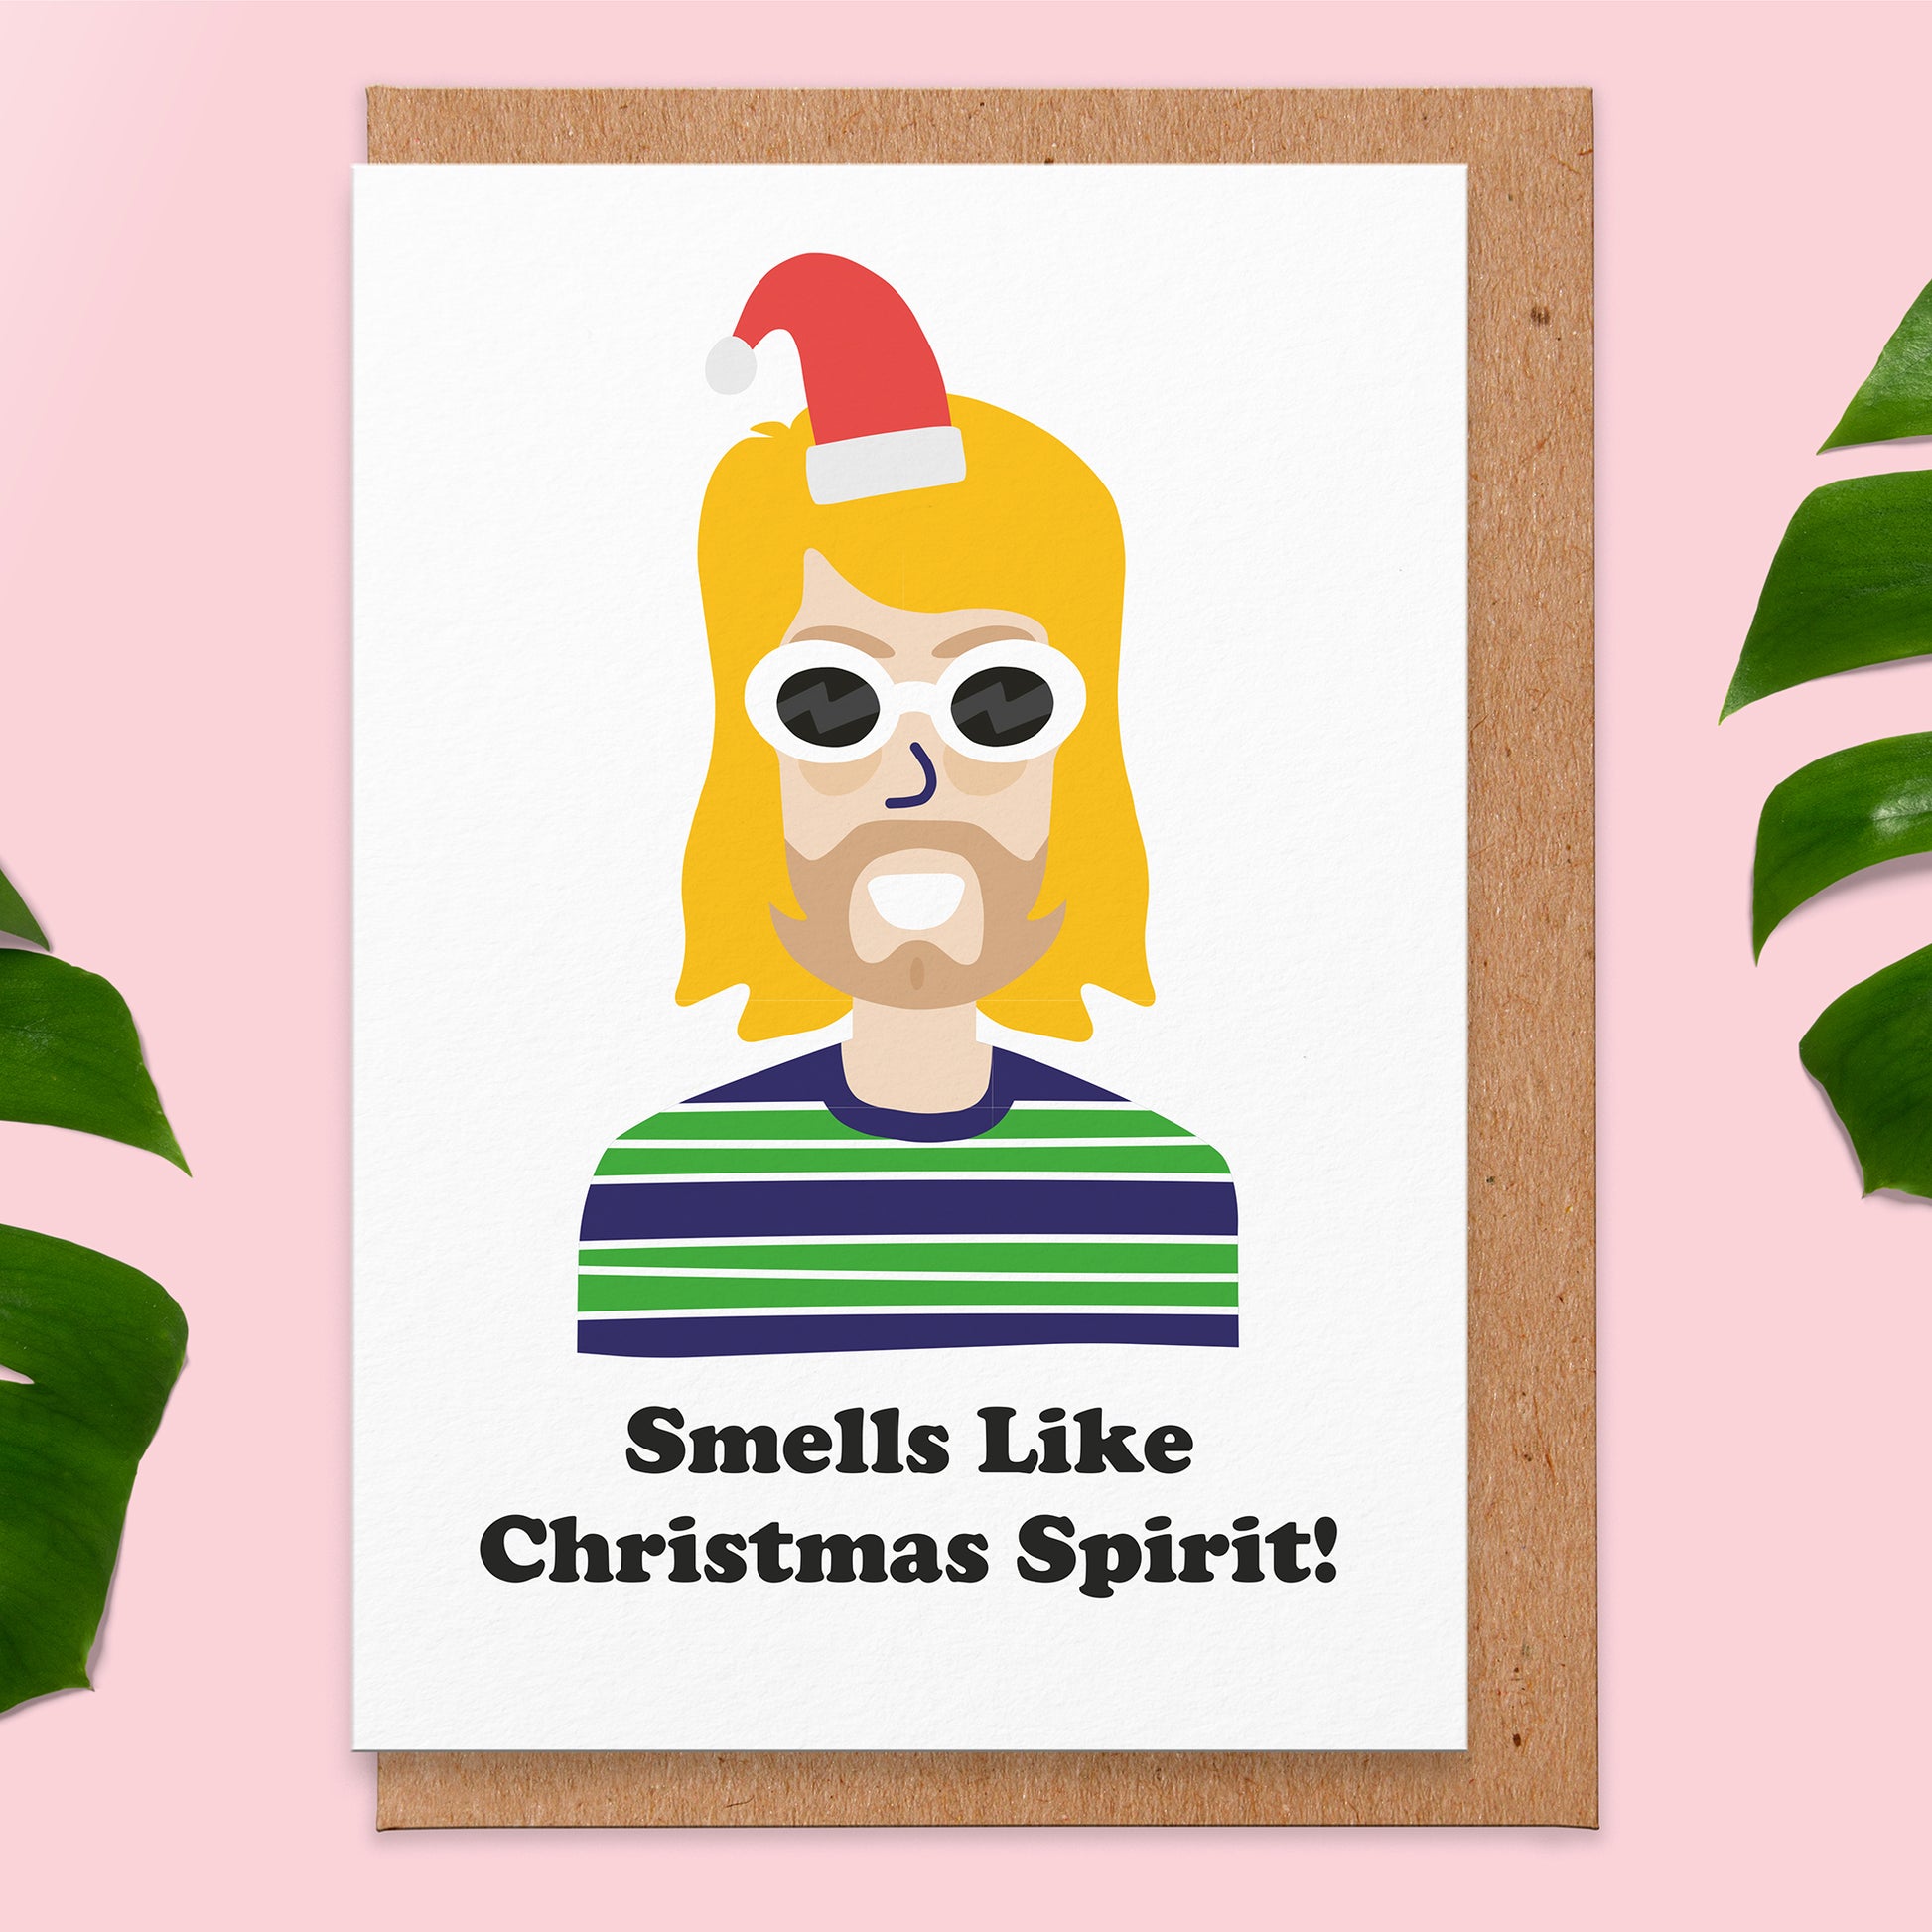 Greetings card that says smells like Christmas spirit on and an illustration of grunge icon wearing a Christmas hat.